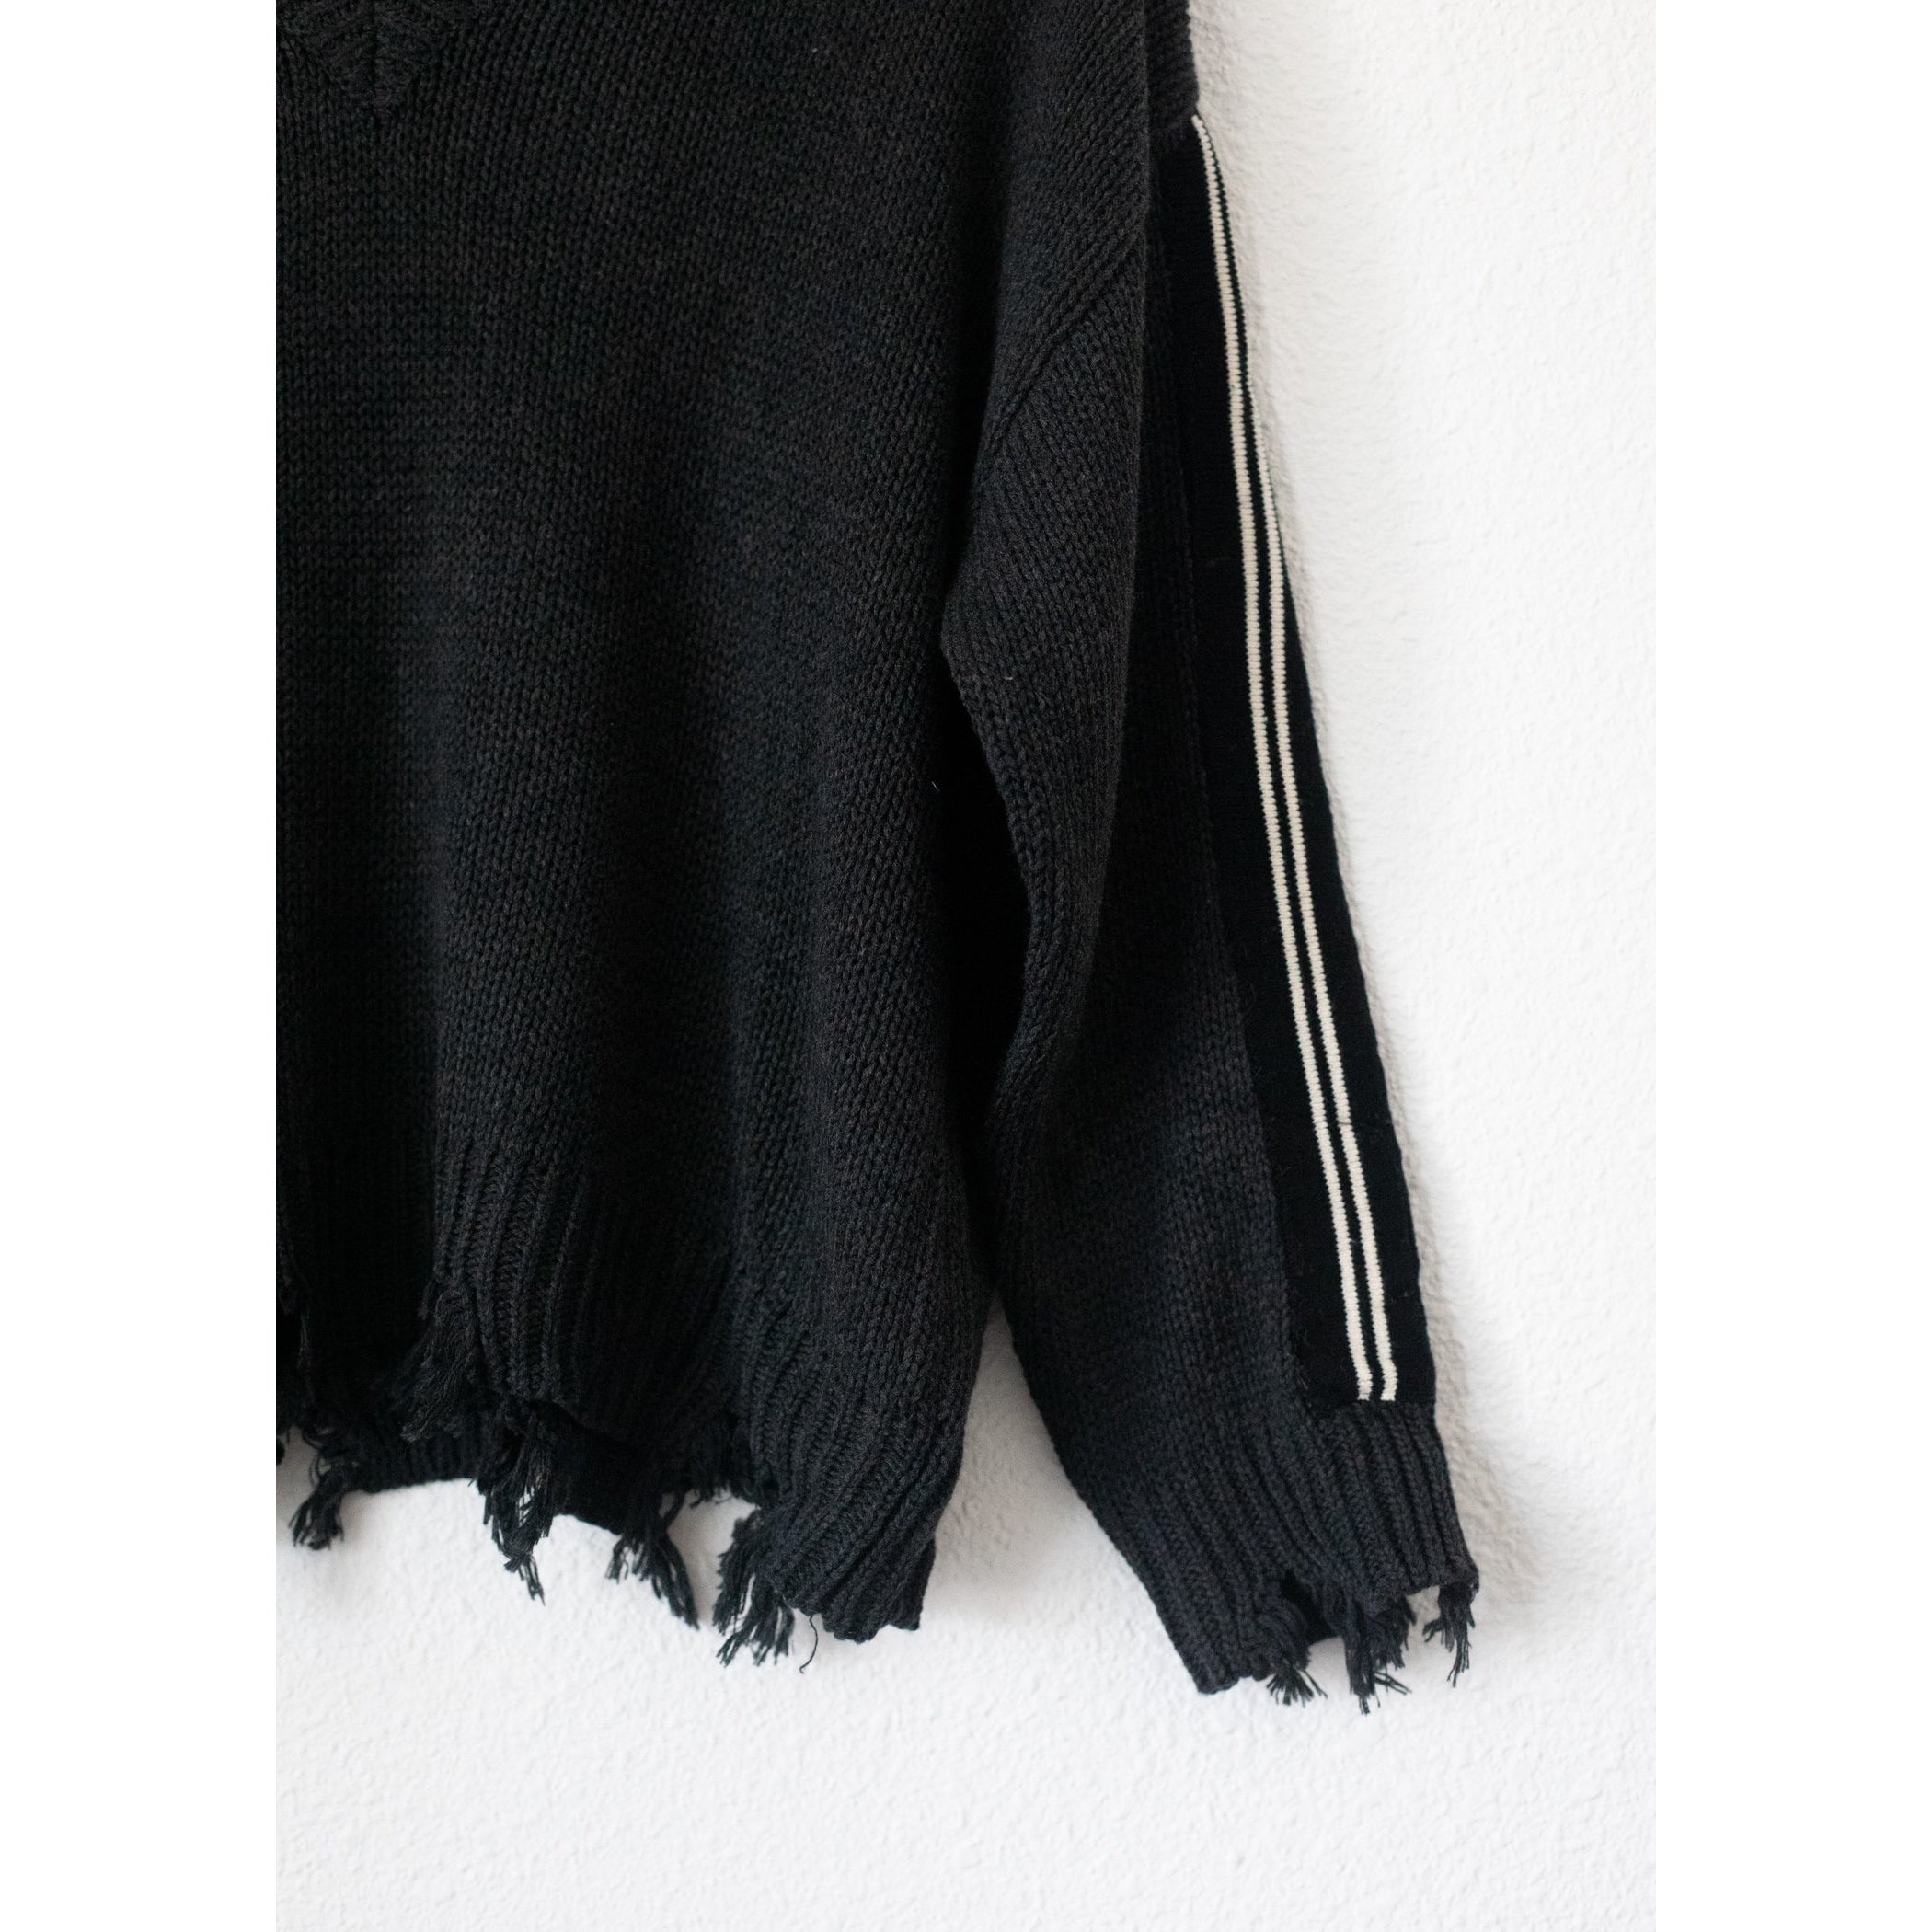 Chennile Knit Destroyed Sweater